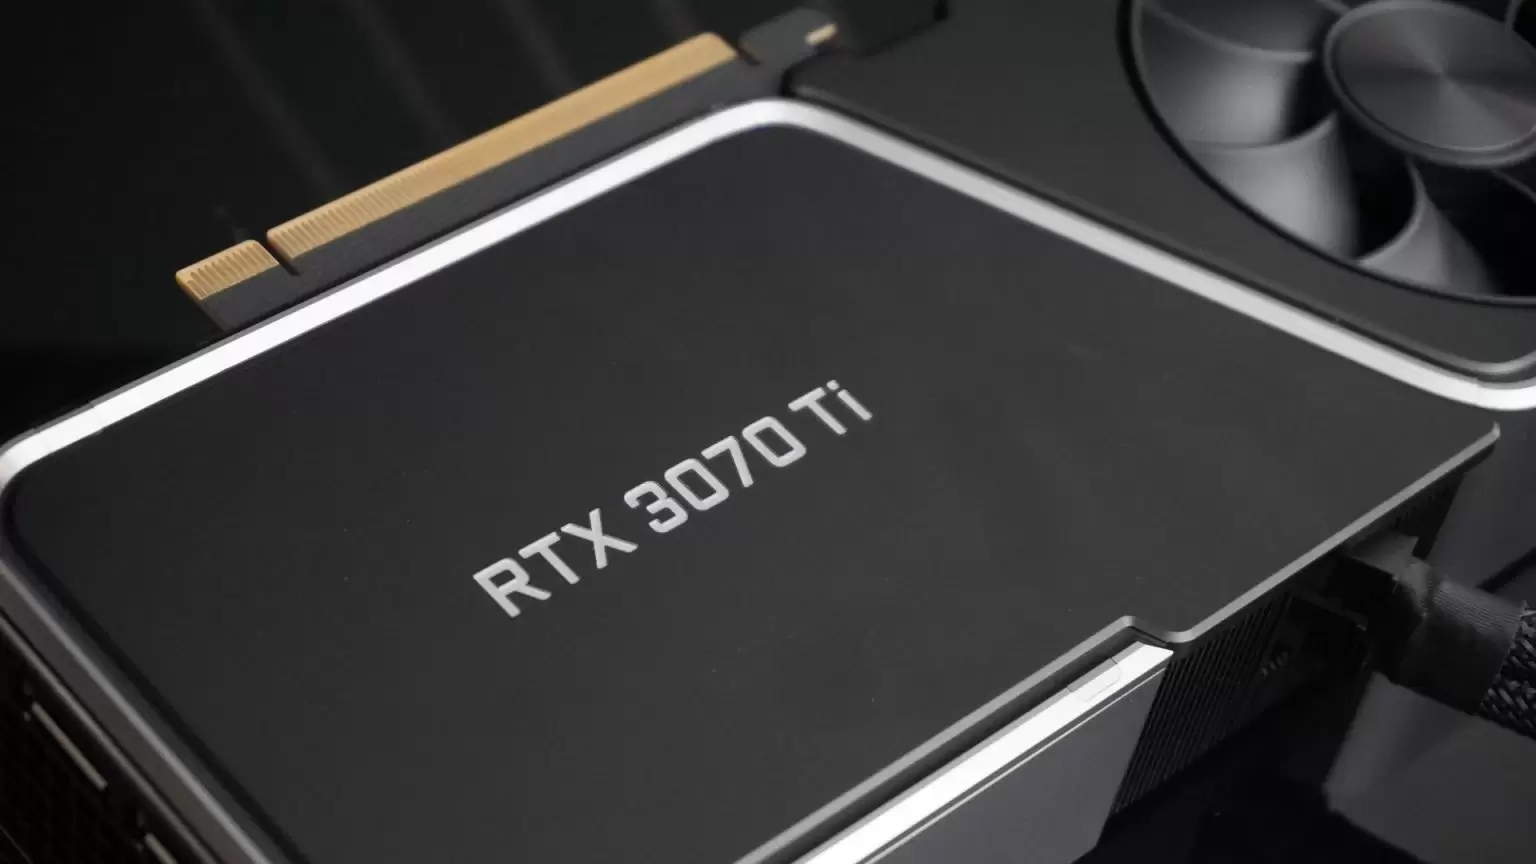 3070 founders edition. RTX 3070 ti Fe. RTX 3070 founders Edition. RTX 3070ti 8gb gddr6x. RTX 3070 ti founders.